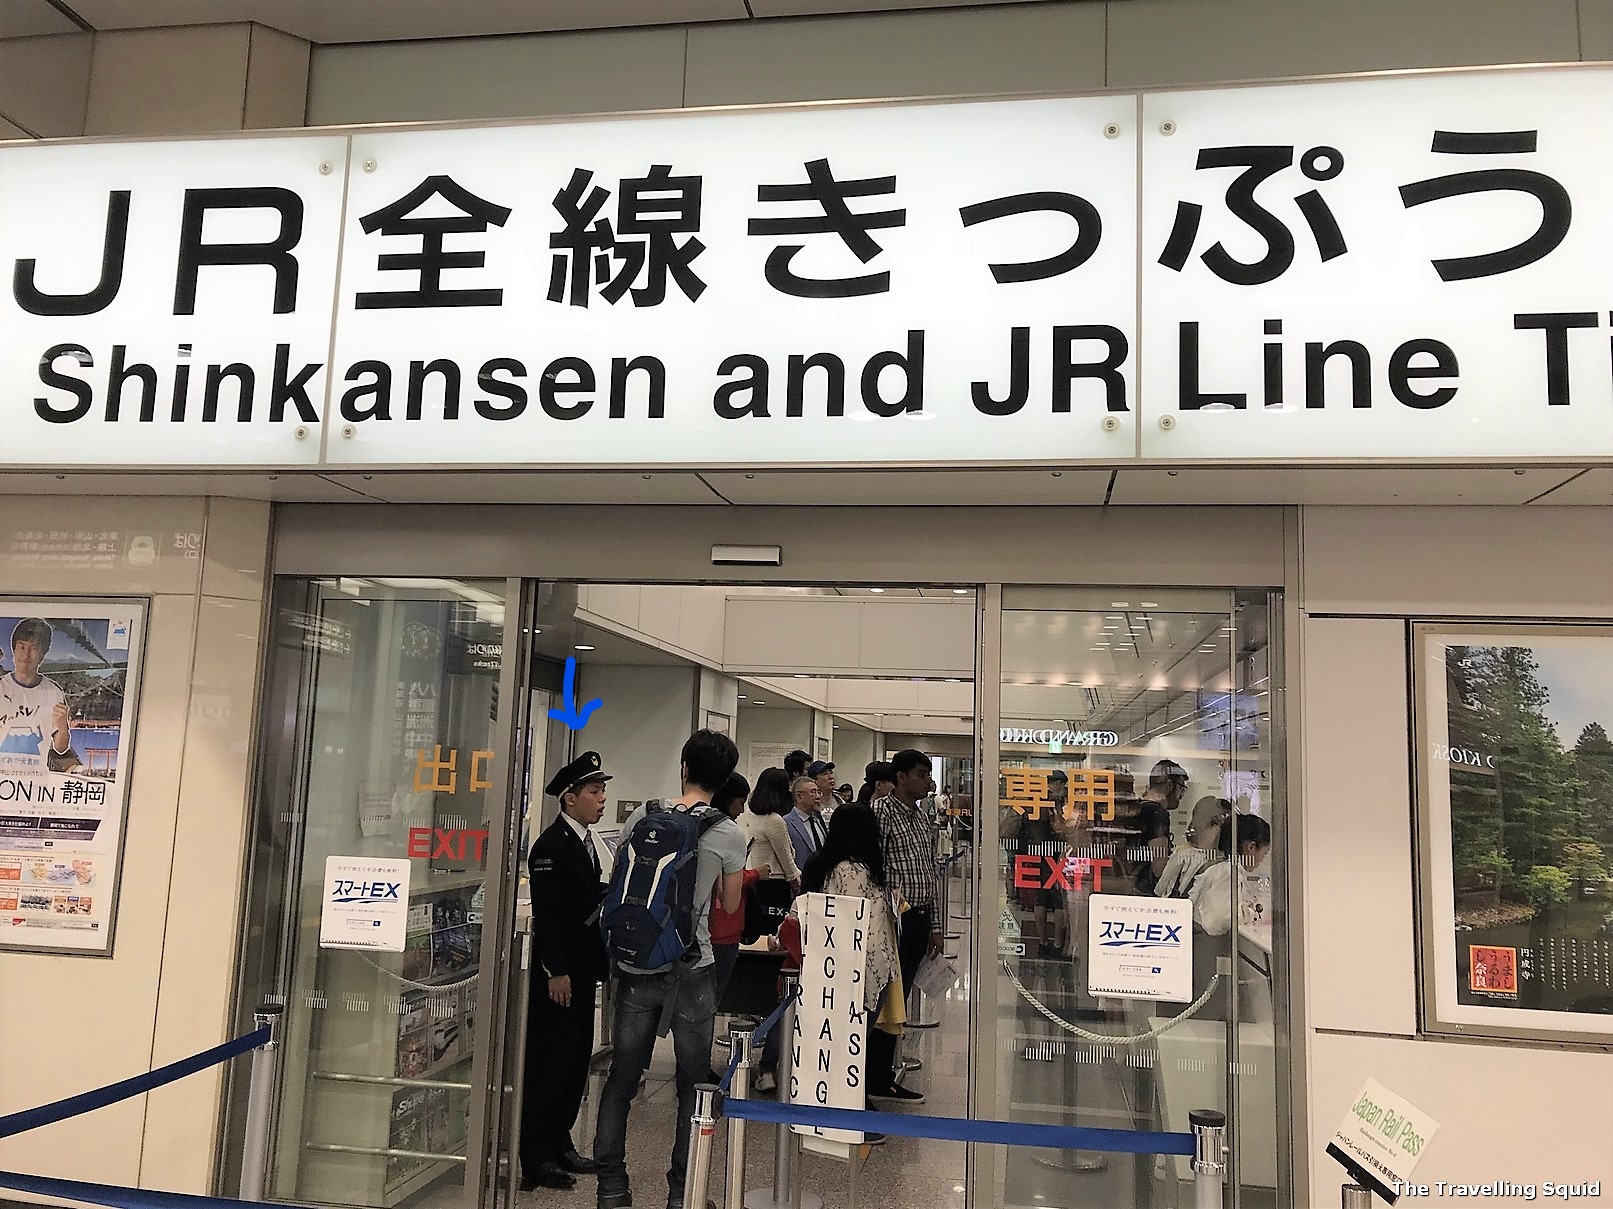 Forget to bring the exchange order of your Japan Rail Pass